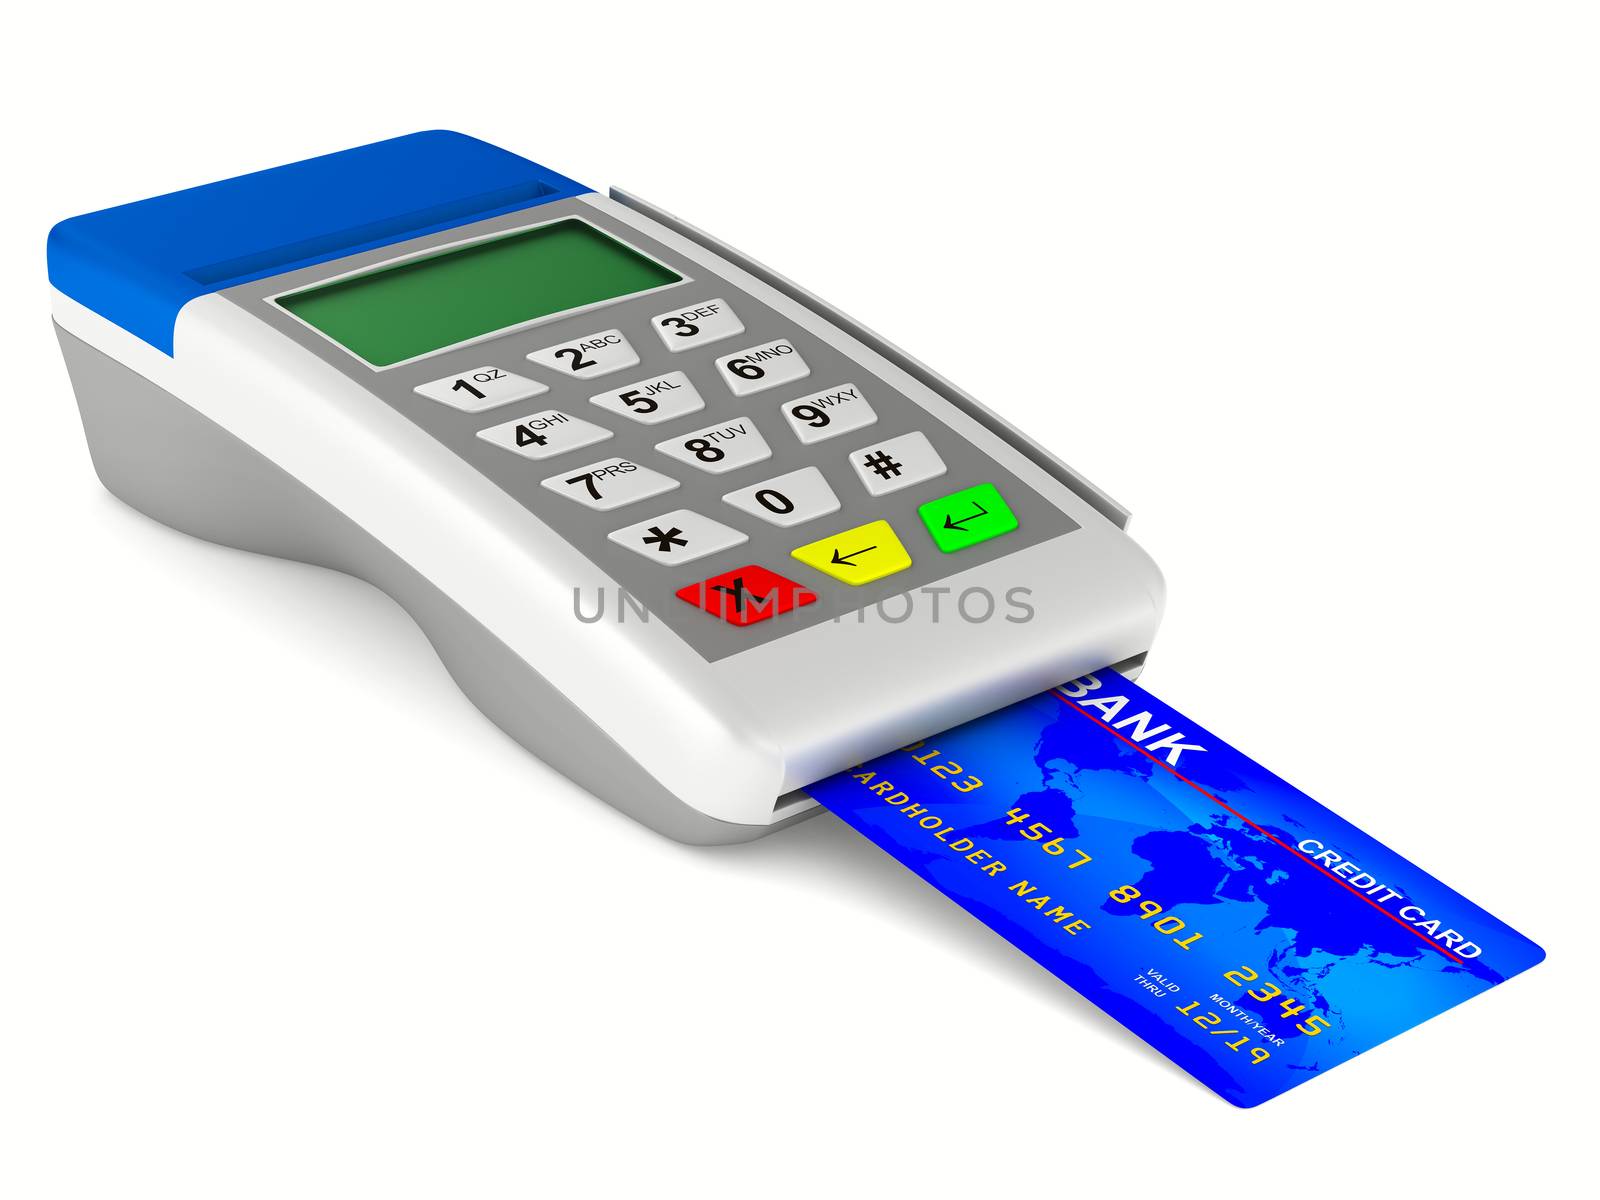 payment terminal on white background. Isolated 3d image